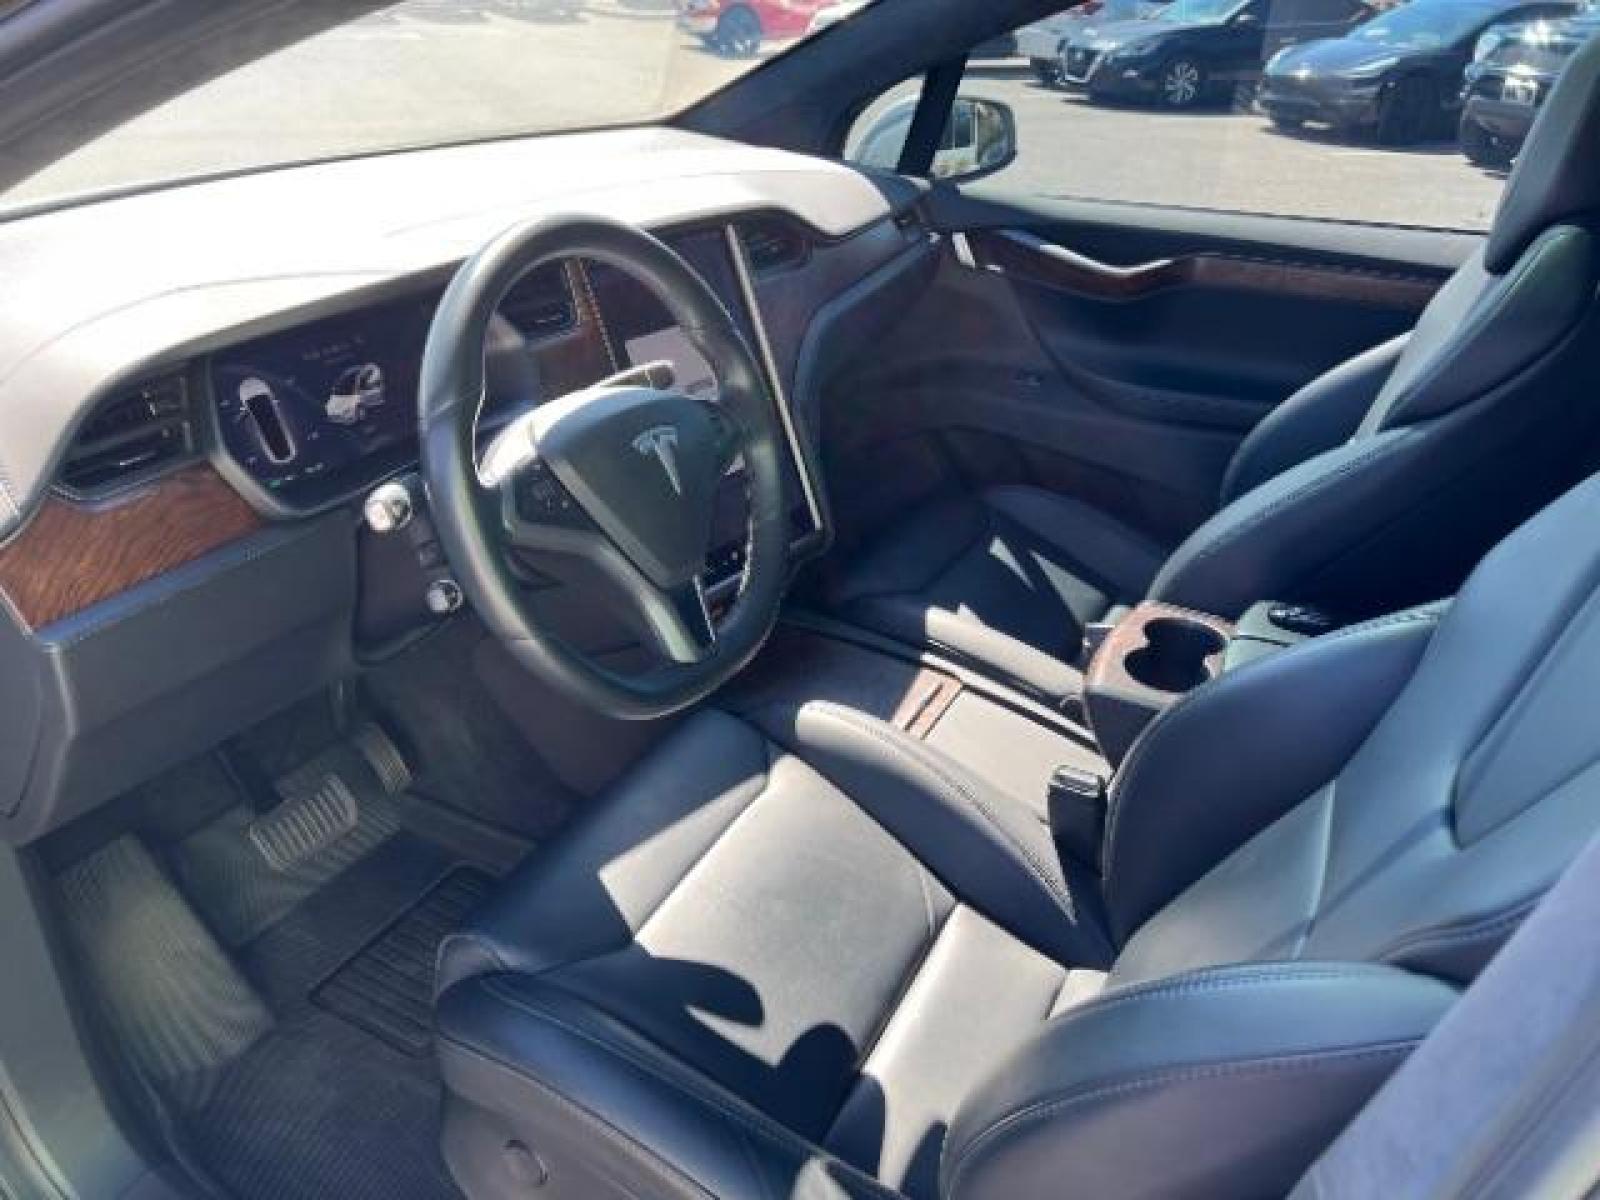 2019 Pearl White Multi-Coat /All Black, leatherette Tesla Model X Standard Range (5YJXCAE21KF) with an ELECTRIC engine, 1-Speed Automatic transmission, located at 1865 East Red Hills Pkwy, St. George, 84770, (435) 628-0023, 37.120850, -113.543640 - AWD, 7 Seats, Autopilot, Raven, Cold weather package, Adaptive suspension, Tow hitch, 2 remotes, FSD computer 3.0 upgrade. Gets 270 miles on a full charge. Black chrome delete vinyl (removeable). This is a beautiful 1 owner MX for way less money and less waiting compared to ordering from Tesla. Bump - Photo #22